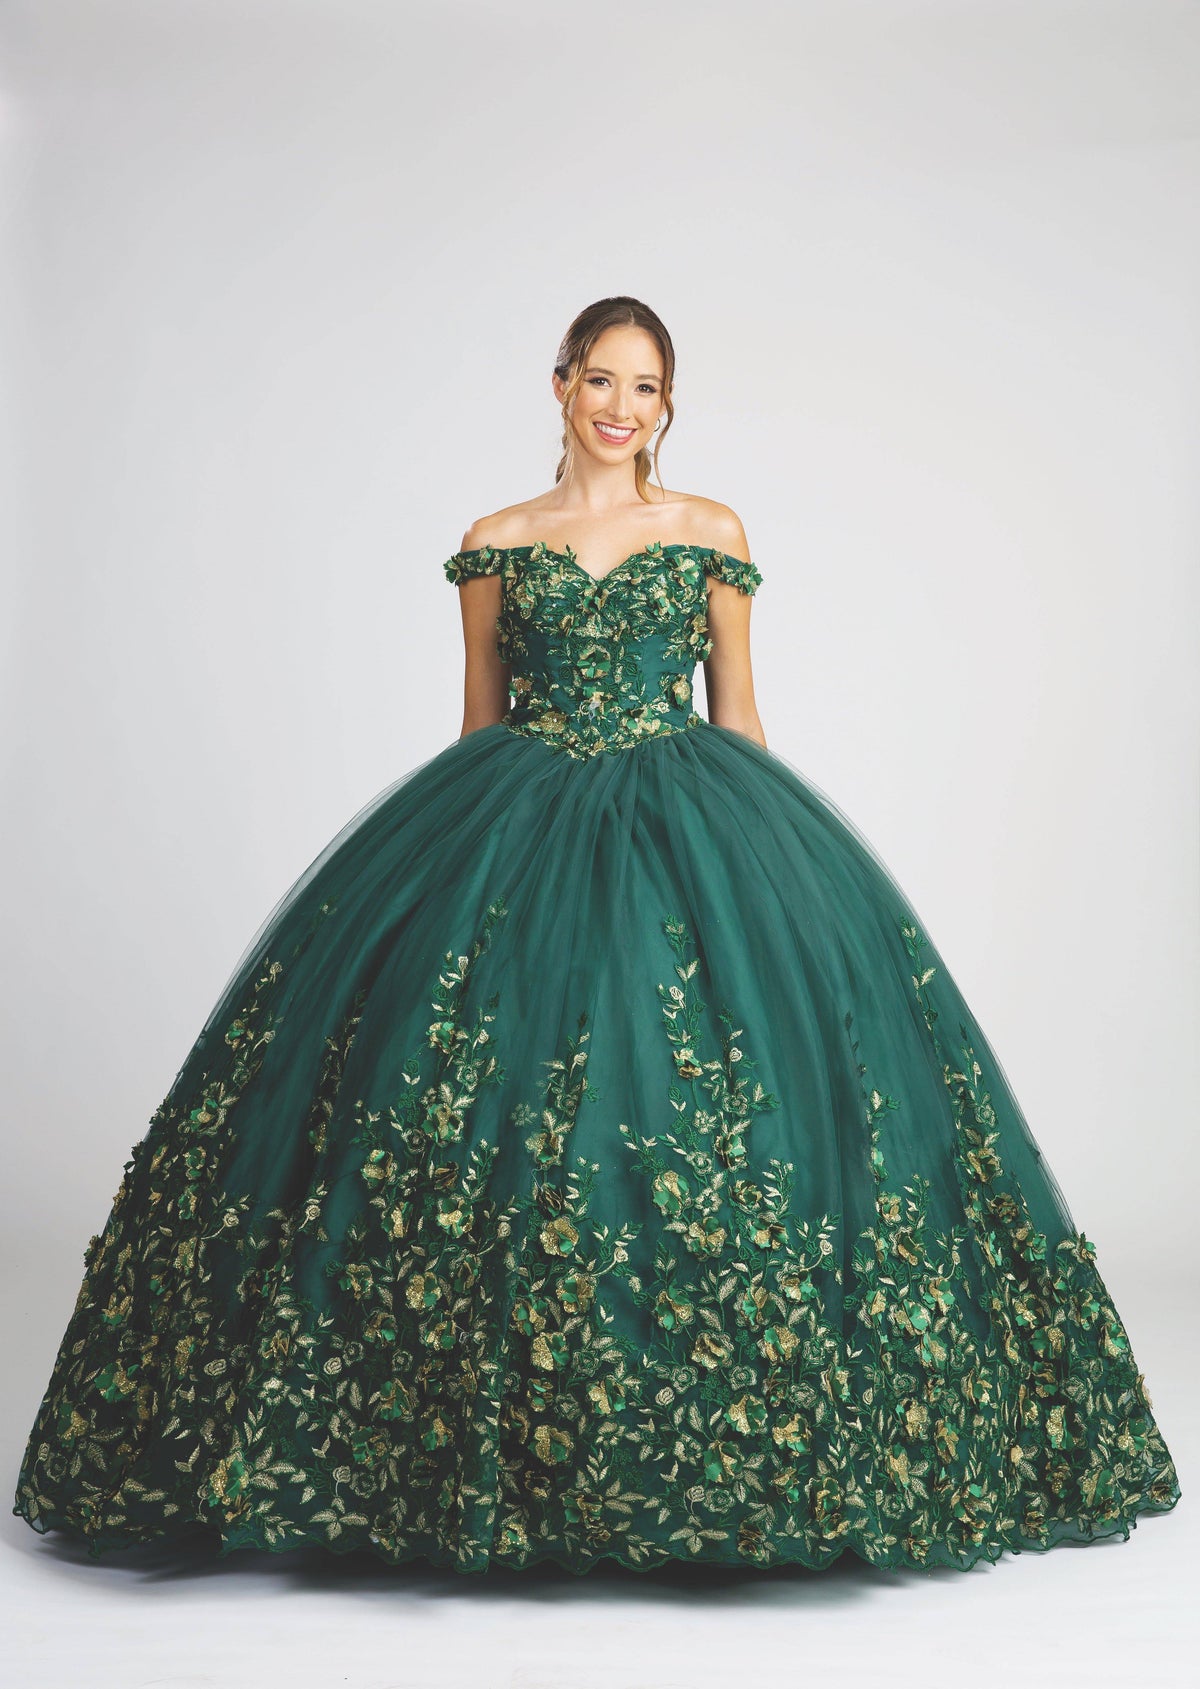 Fiesta 10273 Floral Off Shoulder Ball Gown - NORMA REED